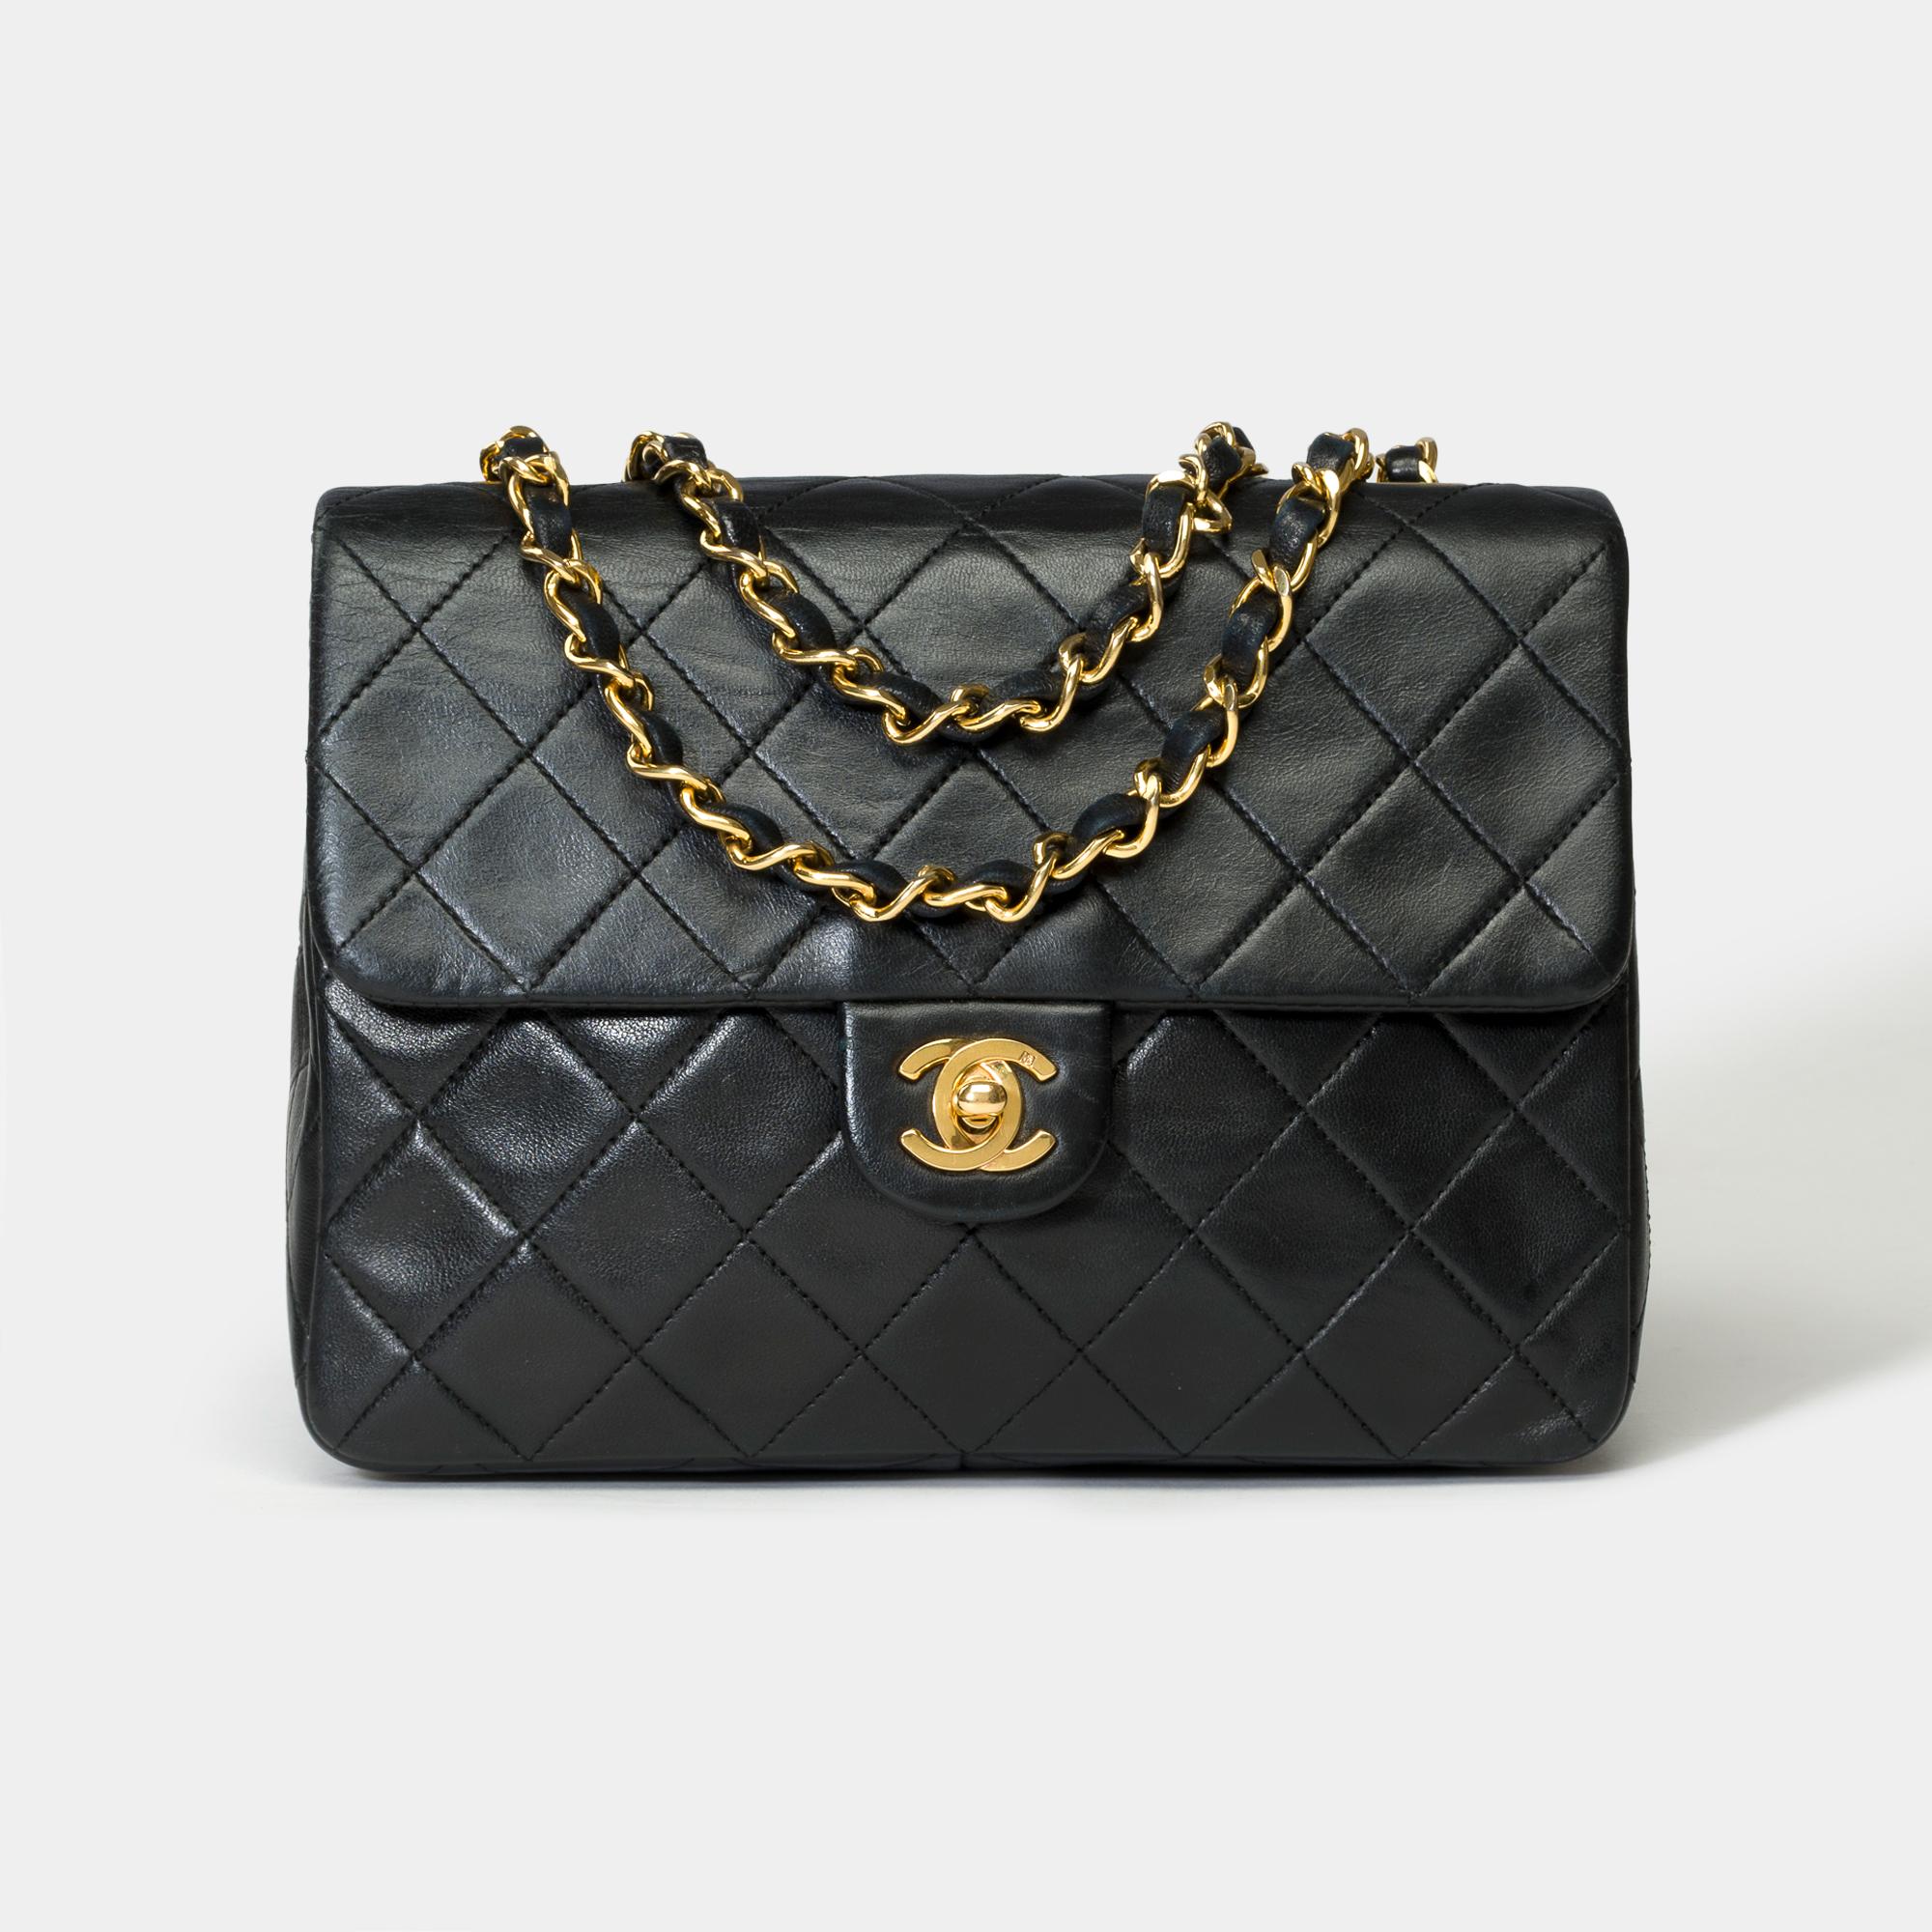 Splendid​ ​Chanel​ ​Mini​ ​Timeless​ ​flap​ ​bag​ ​in​ ​black​ ​quilted​ ​lambskin​ ​leather,​ ​shoulder​ ​strap​ ​in​ ​gold​ ​metal​ ​interlaced​ ​with​ ​black​ ​lambskin​ ​leather​ ​for​ ​a​ ​hand​ ​or​ ​shoulder​ ​or​ ​crossbody​ ​carry

Closure​